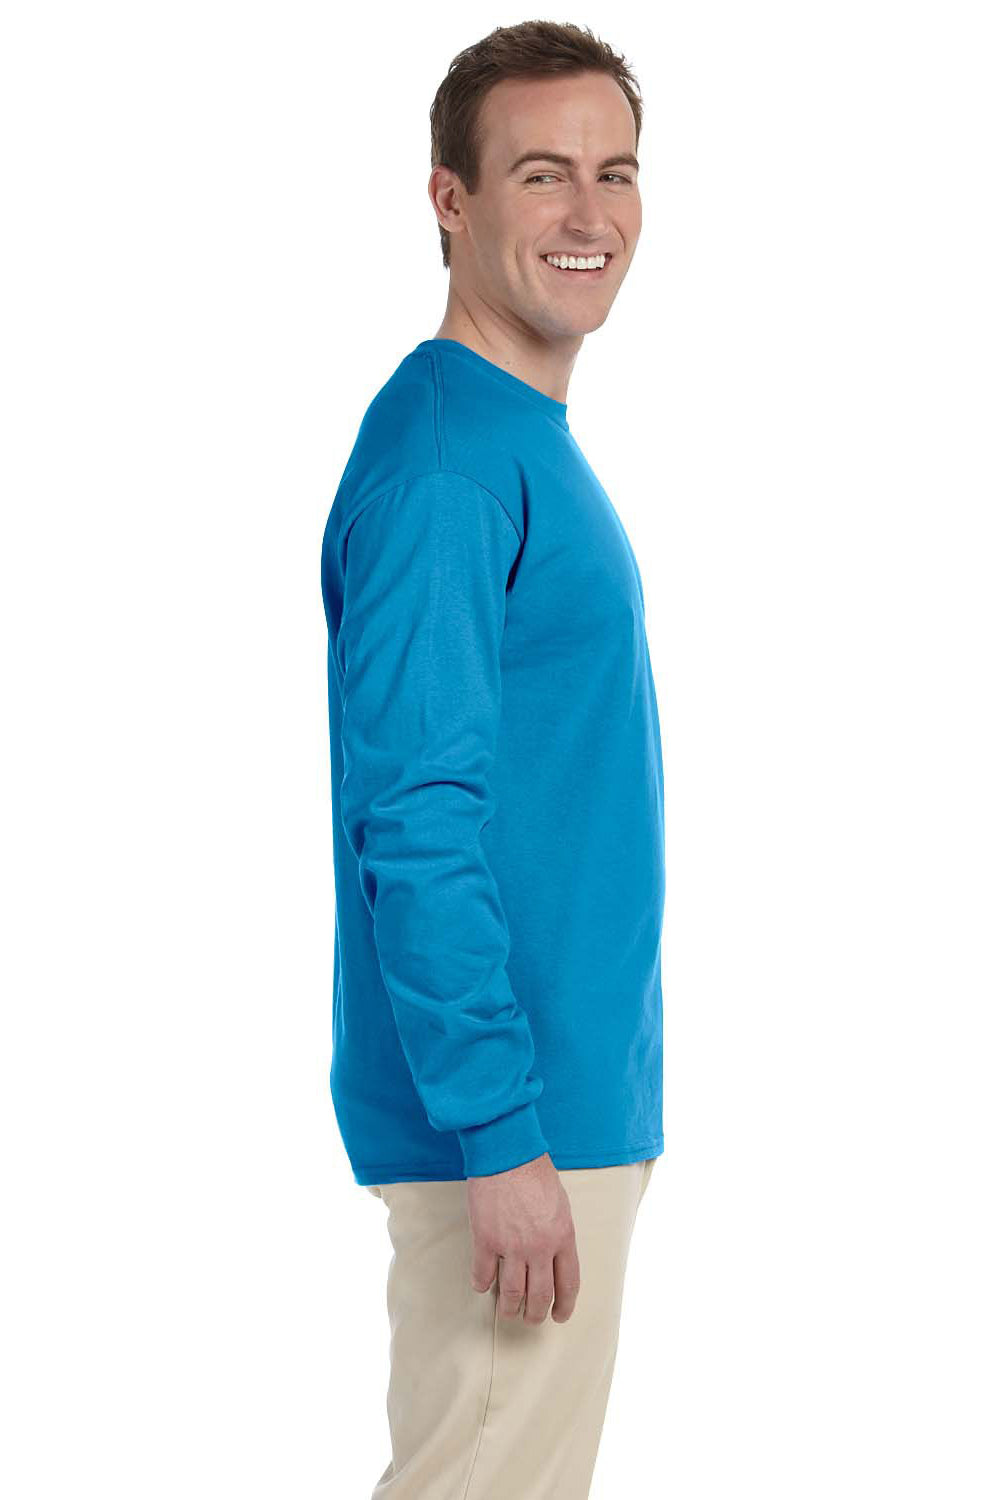 Fruit Of The Loom 4930 Mens HD Jersey Long Sleeve Crewneck T-Shirt Pacific Blue Side